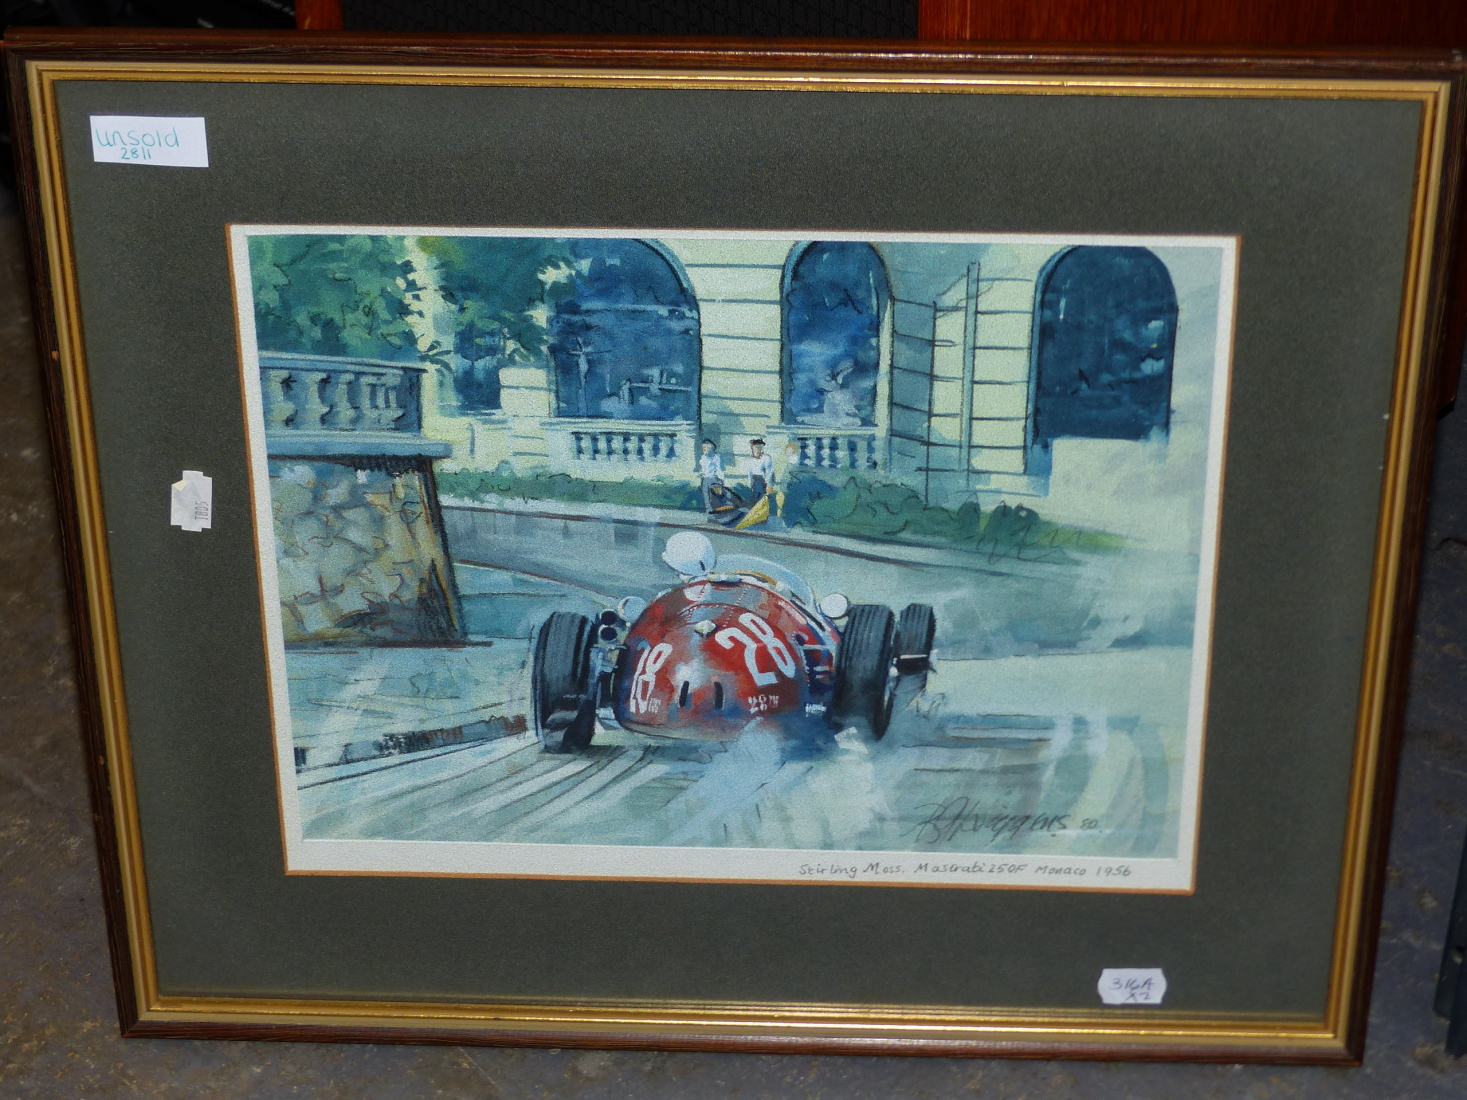 RODNEY DIGGINS, "STERLING MOSS" MONACO 1956, WATERCOLOUR SIGNED AND DATED 1980,TOGETHER WITH - Image 2 of 11